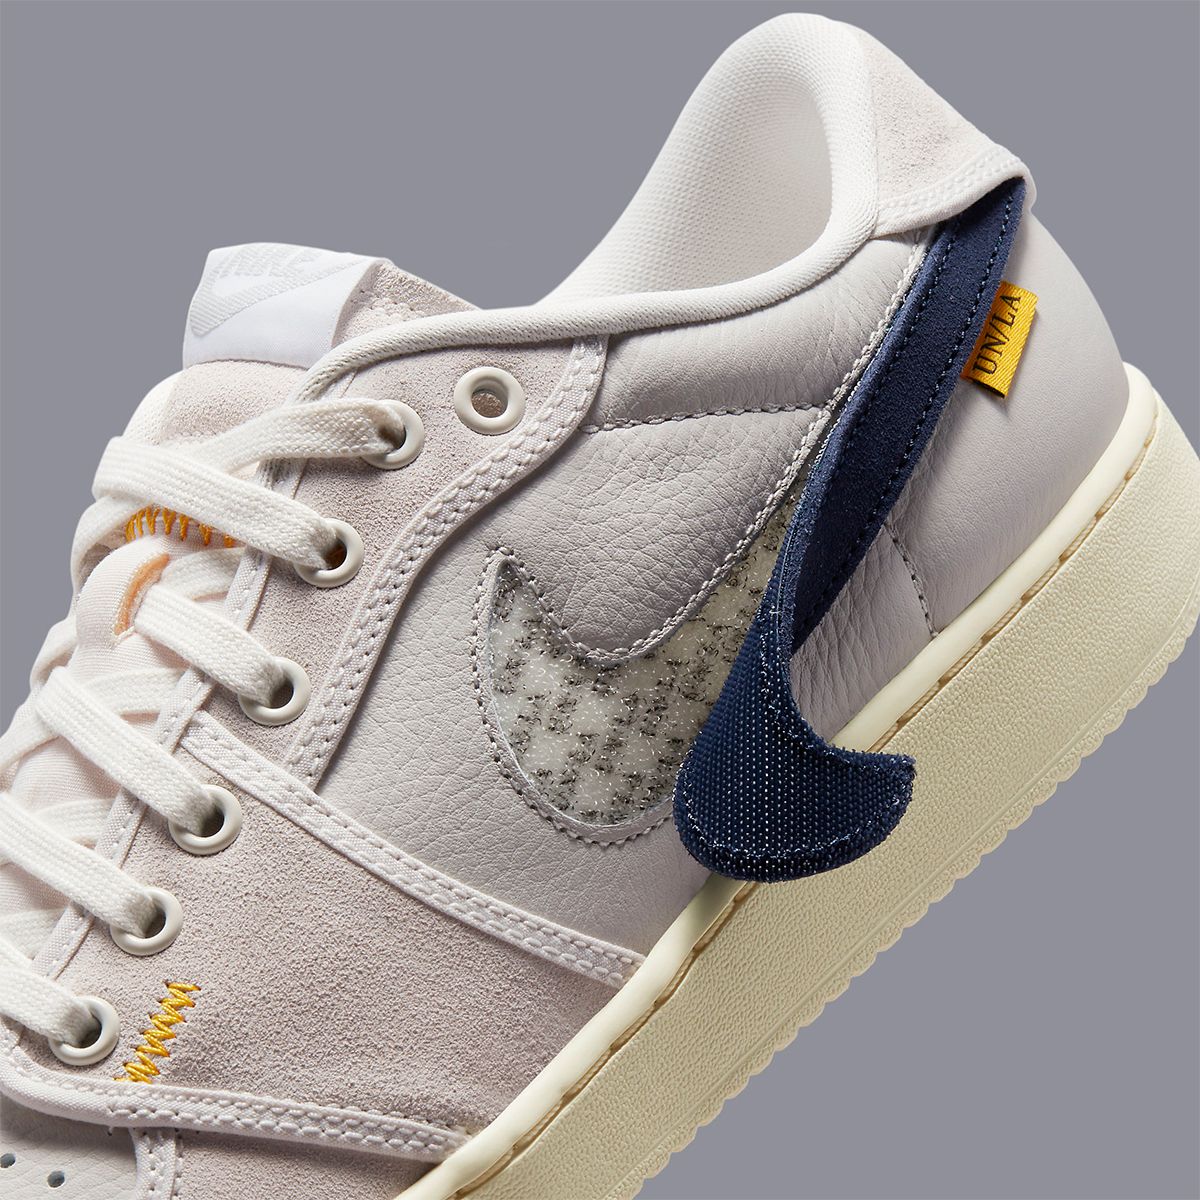 Where to Buy the Union x Air Jordan 1 KO Low COLLECTION | House of